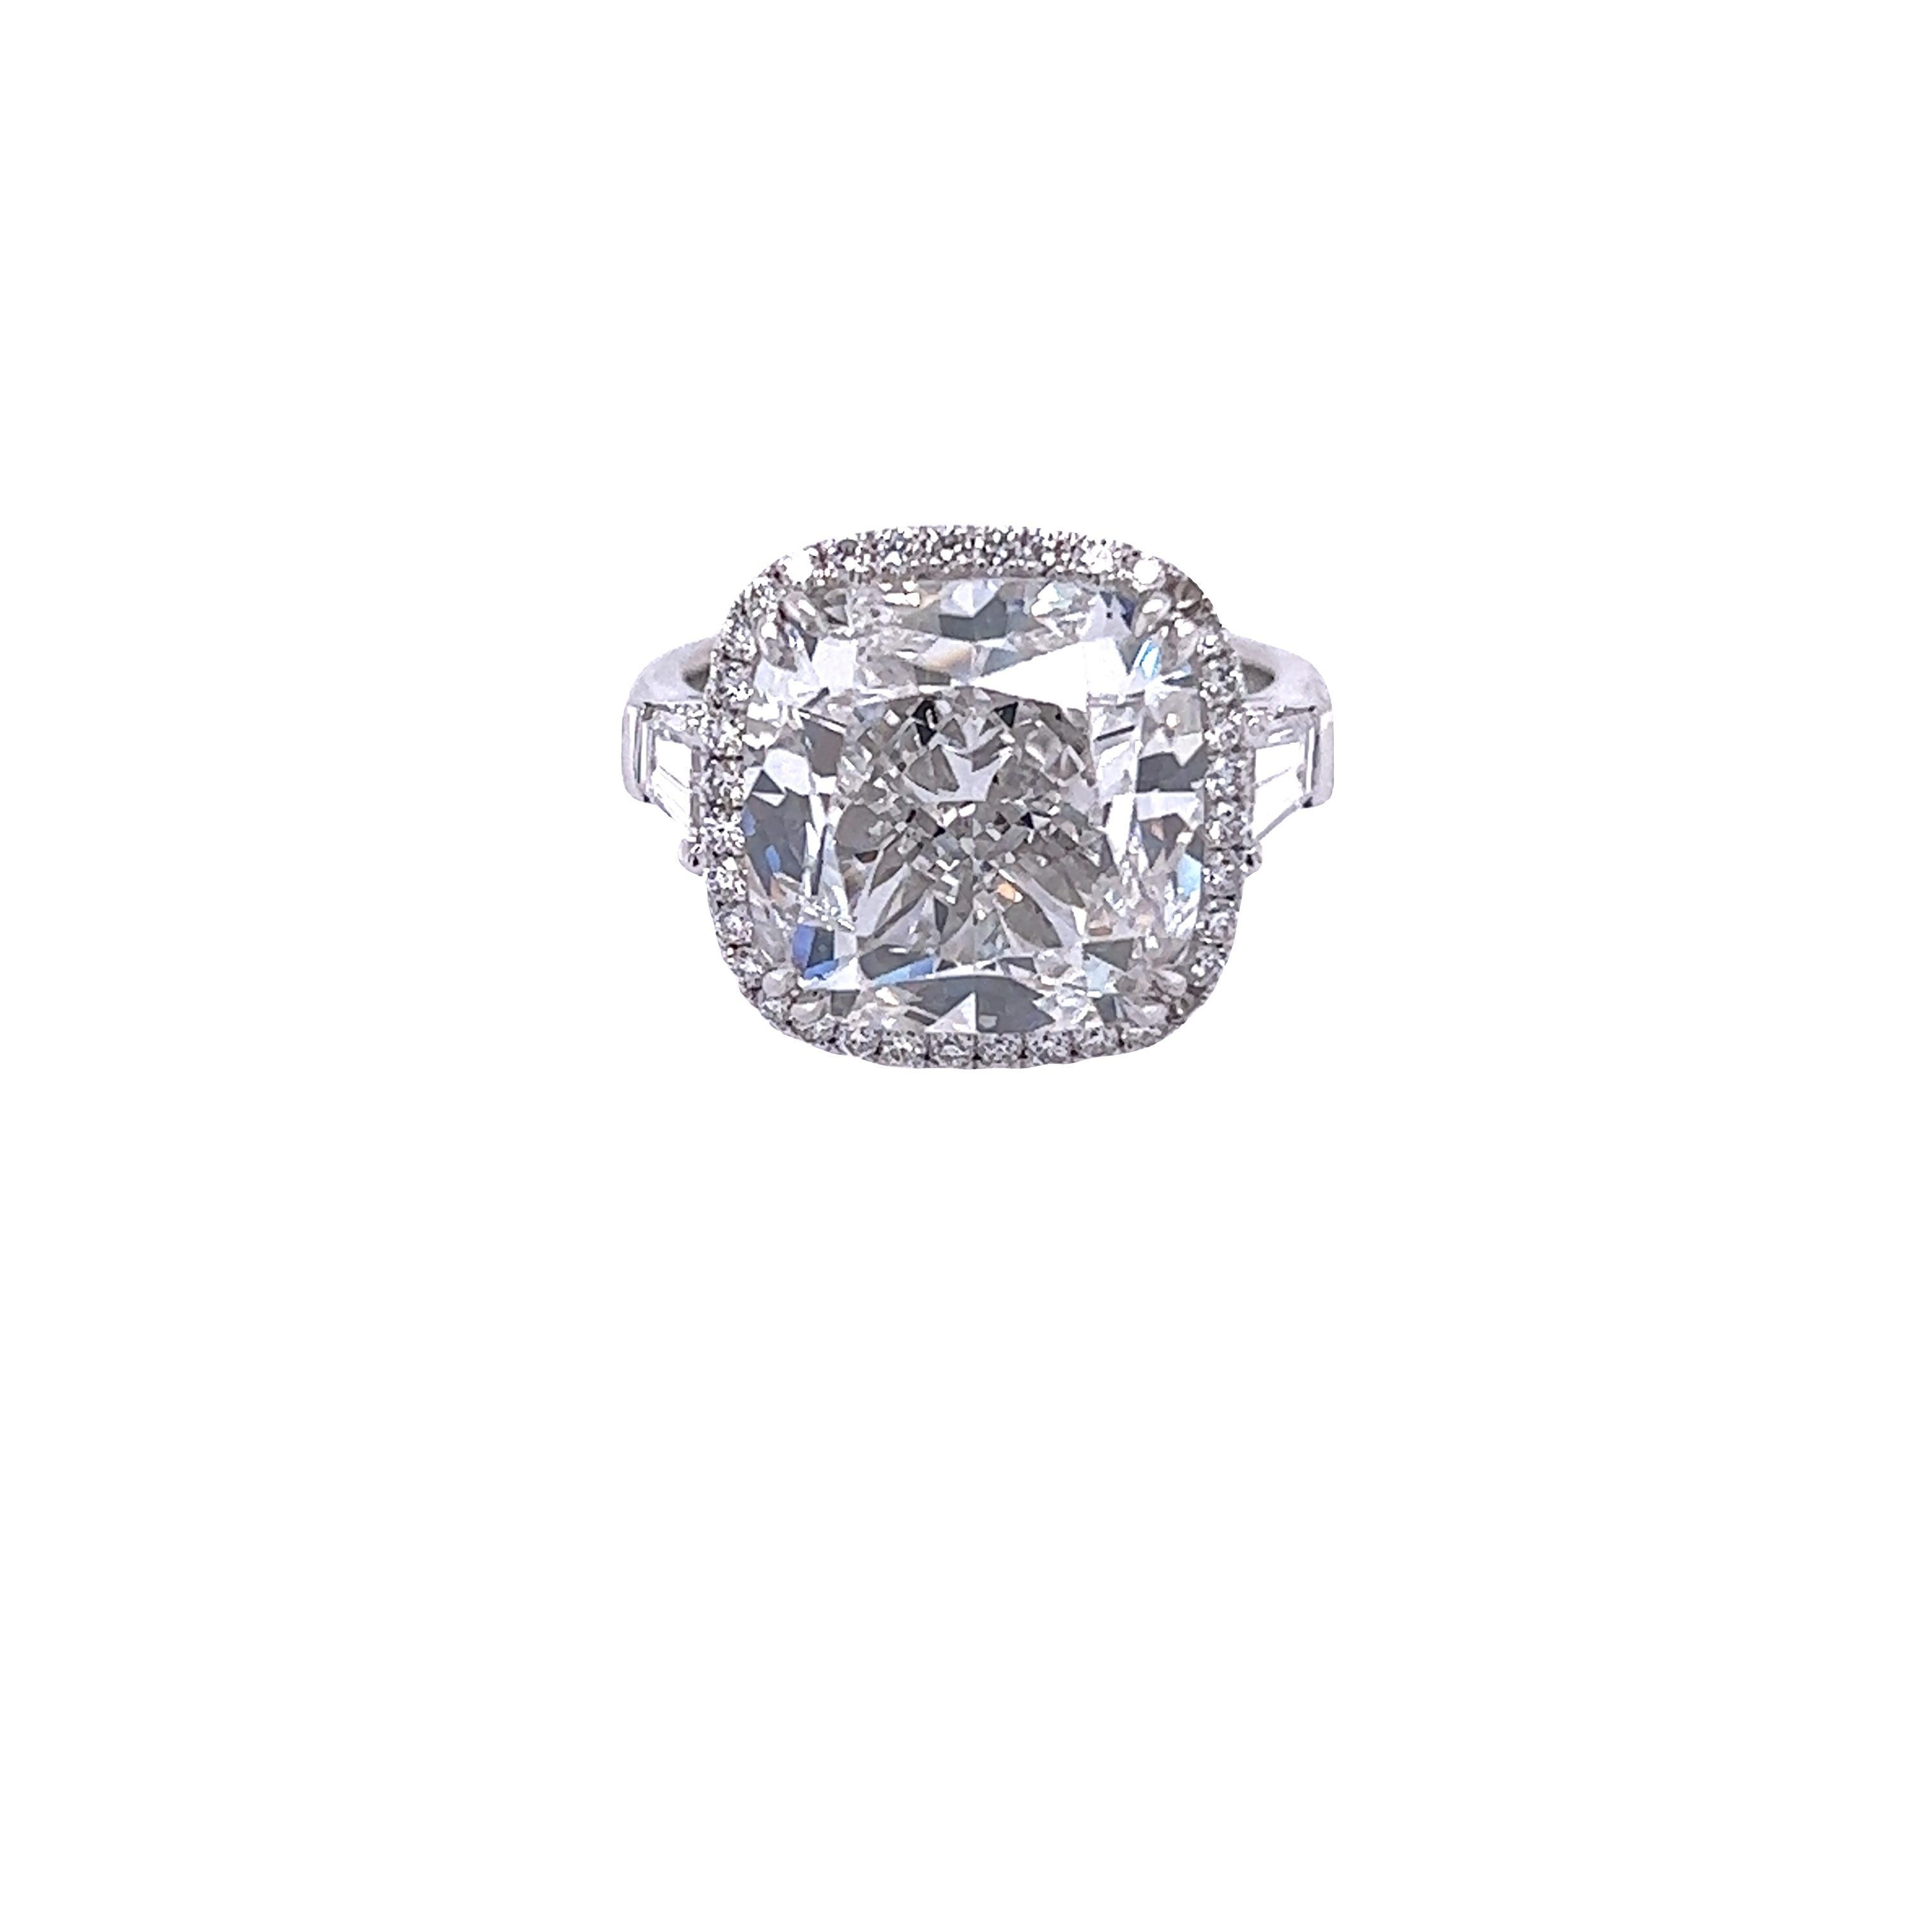 Rosenberg Diamonds & Co. 10.02 carat Cushion cut E color VS2 clarity is accompanied by a GIA certificate. This spectacular Cushion is full of brilliance and it is set in a handmade platinum setting with perfectly matched pair of trapezoid side